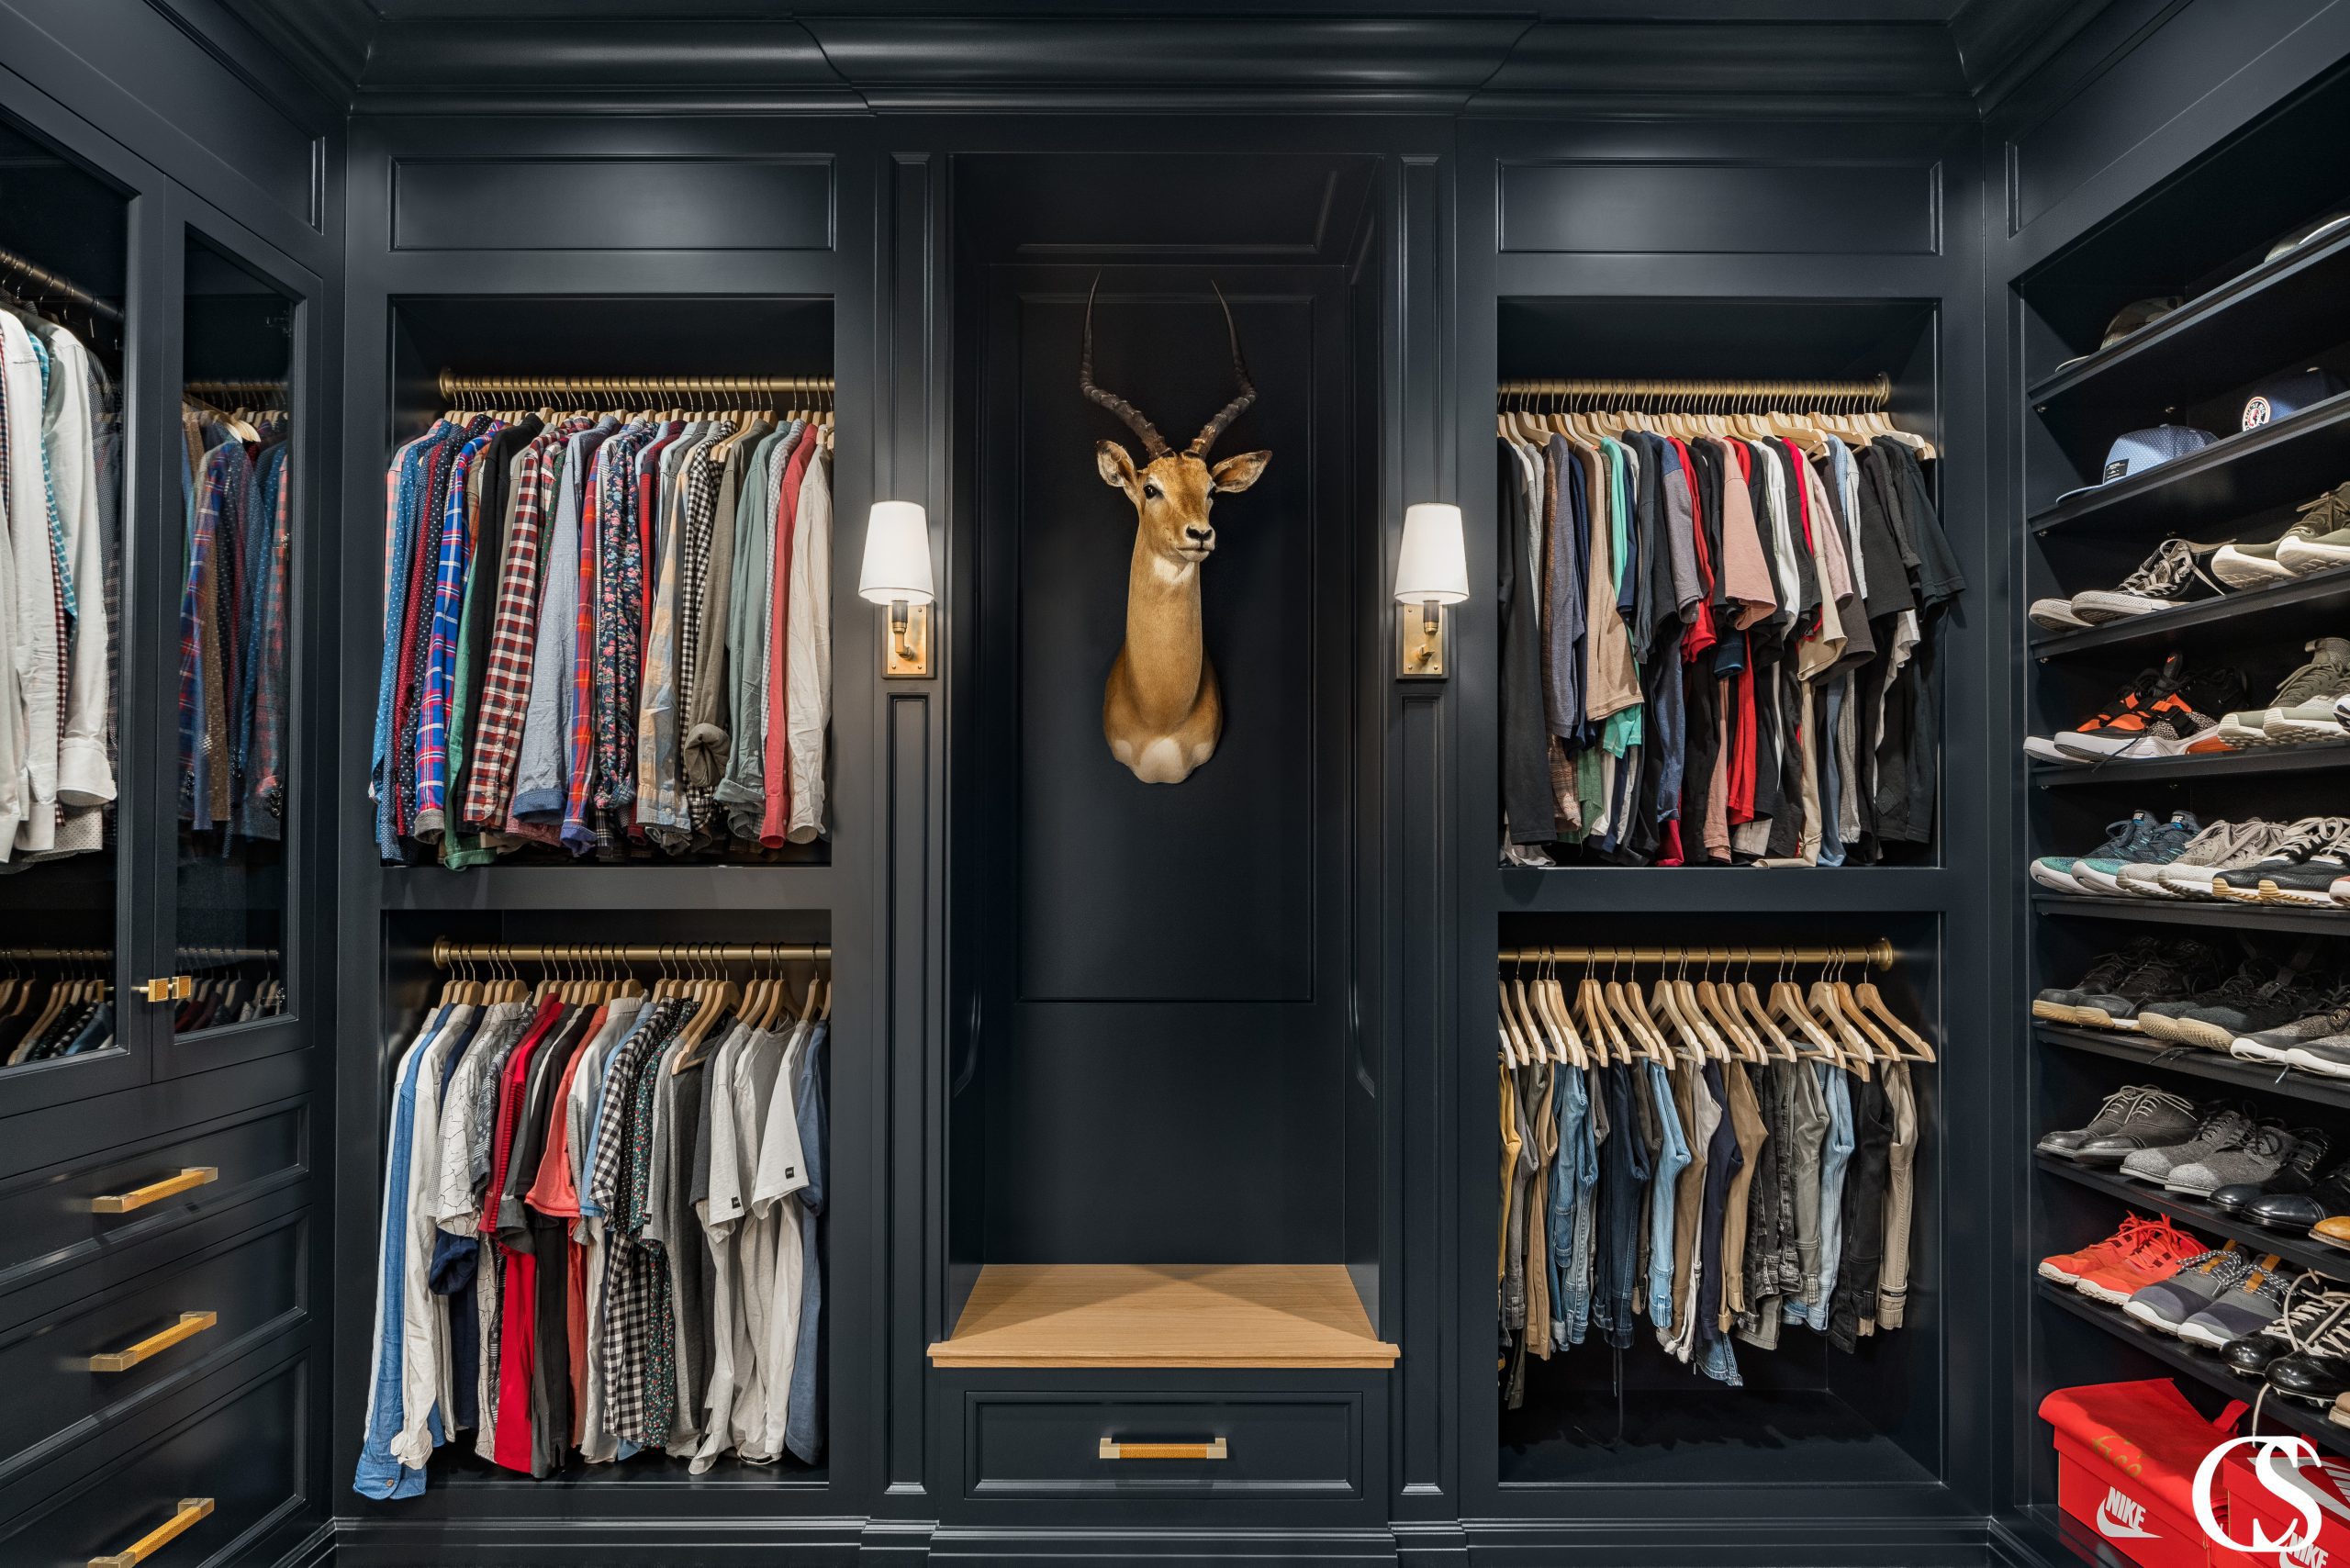 Don't ever think that custom built in cabinet closet design is just for the ladies. This man cave of a dream closet is moody and makes every hat, shirt, and pair of shoes pop.